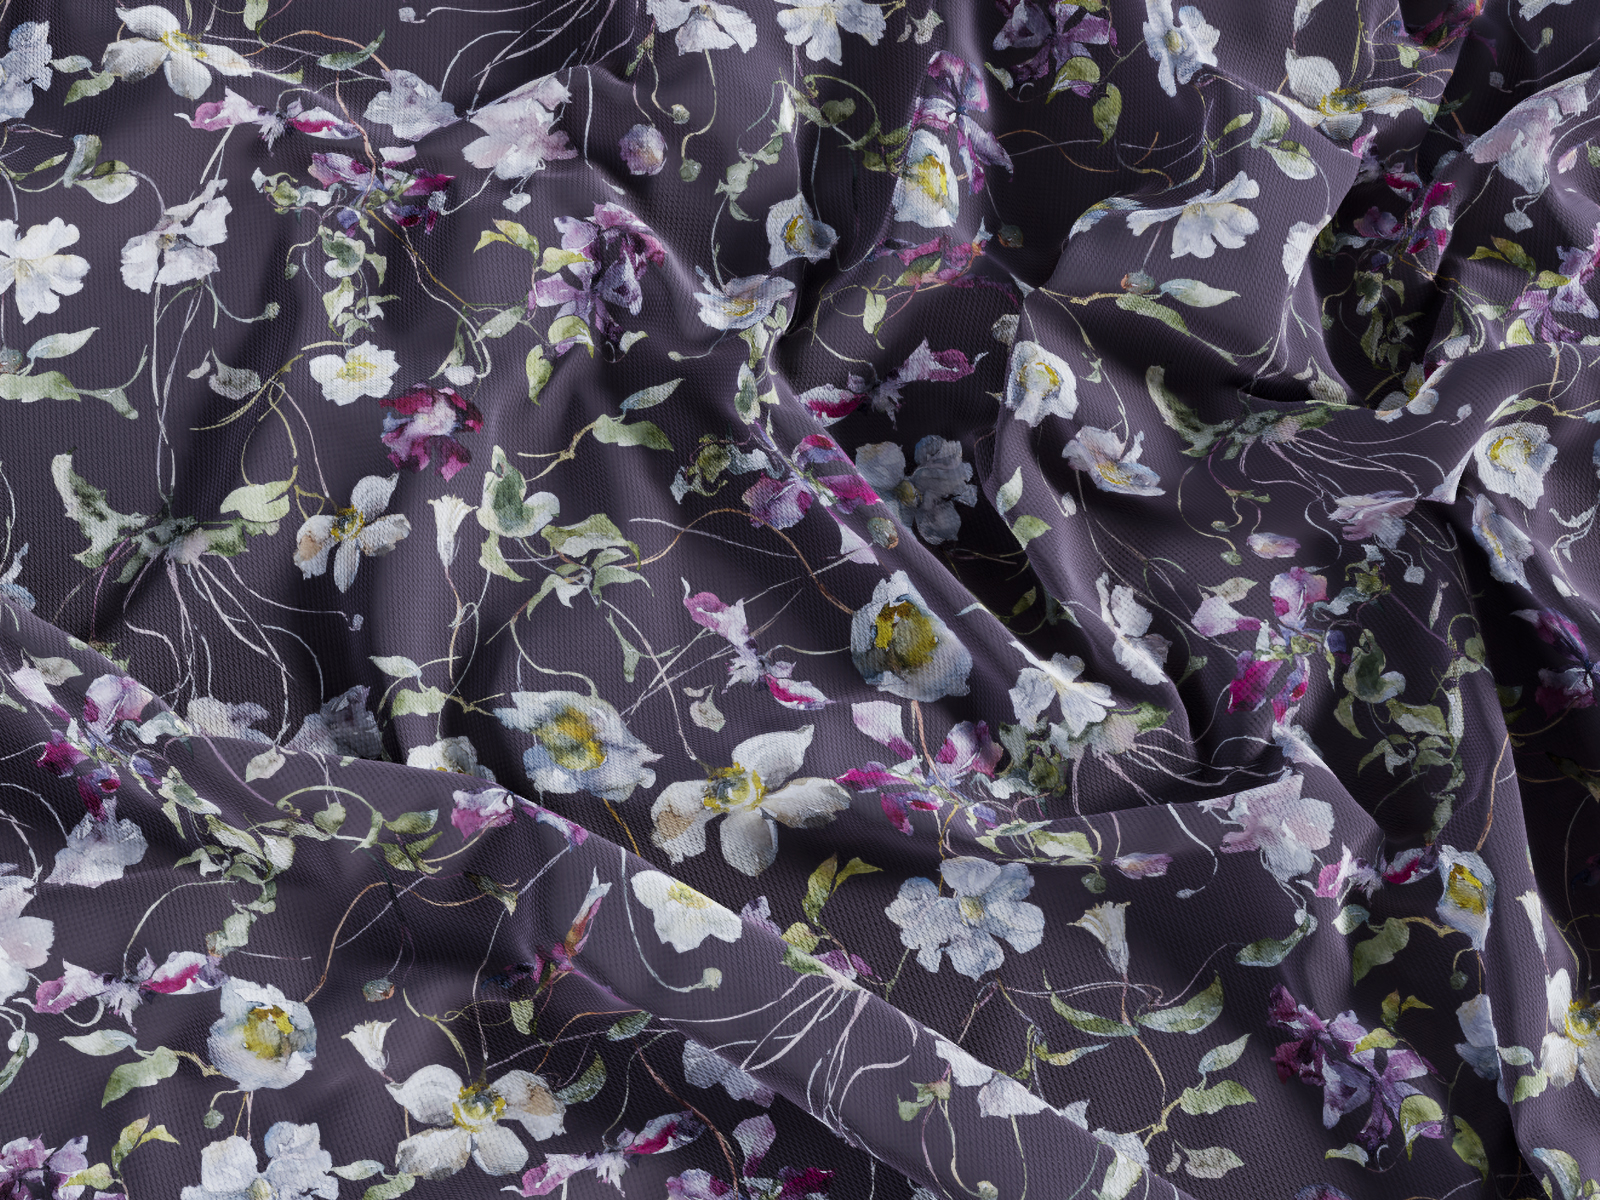 Clematis pattern by Polina Kukulieva on Dribbble